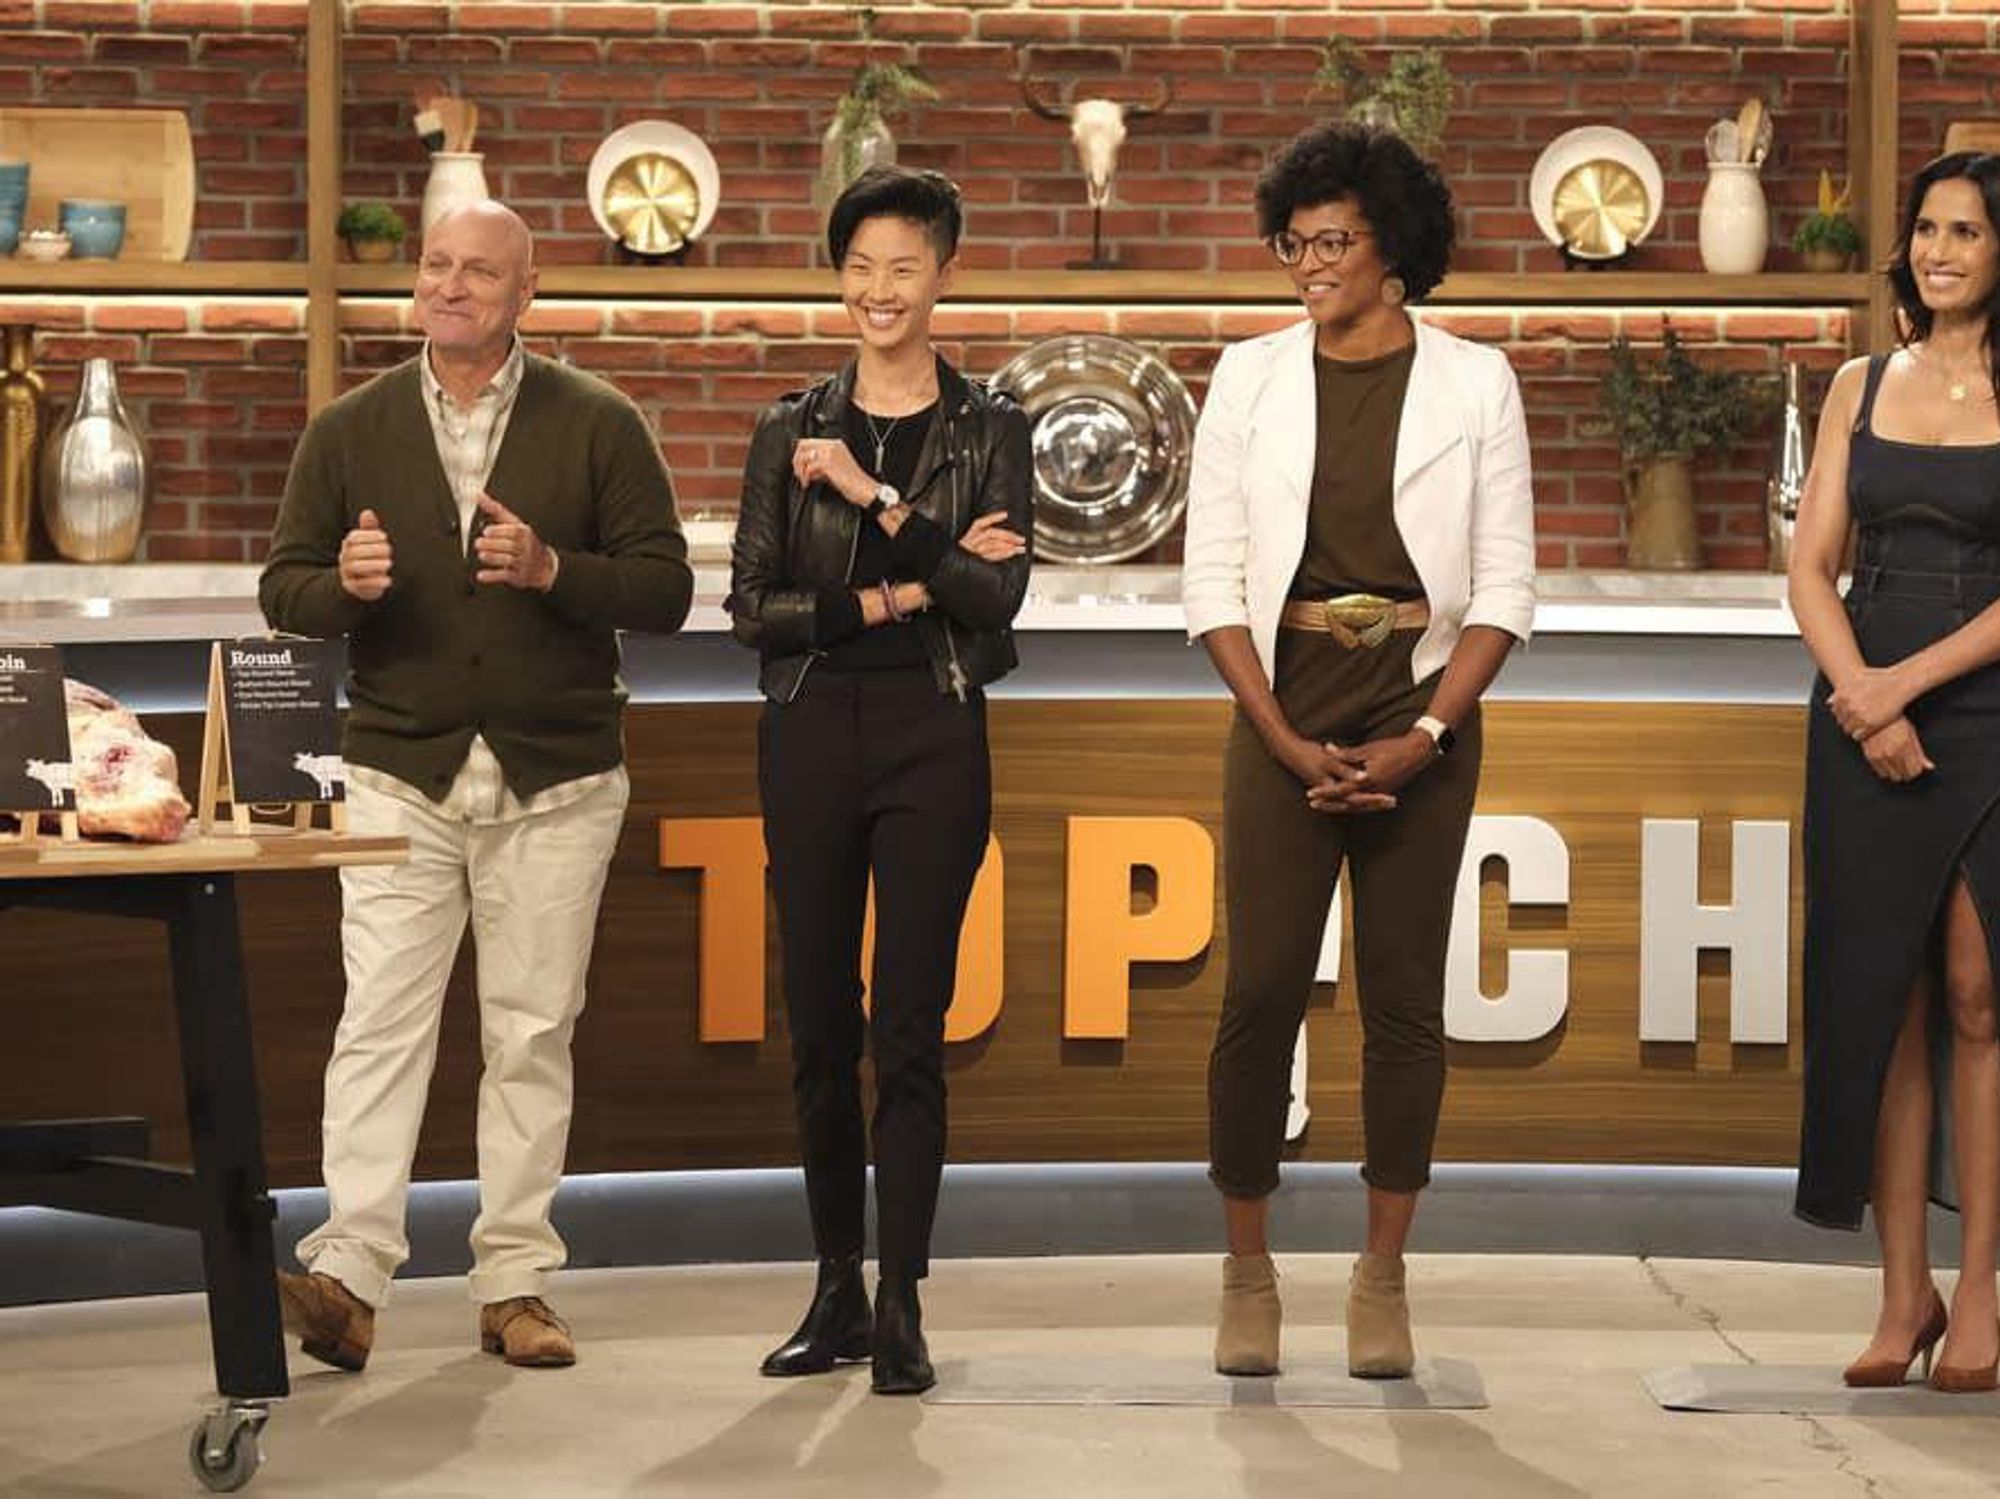 Dawn Burrell, second from right, joins Kristen Kish, Tom Colicchio, and Padma Lakshmi.